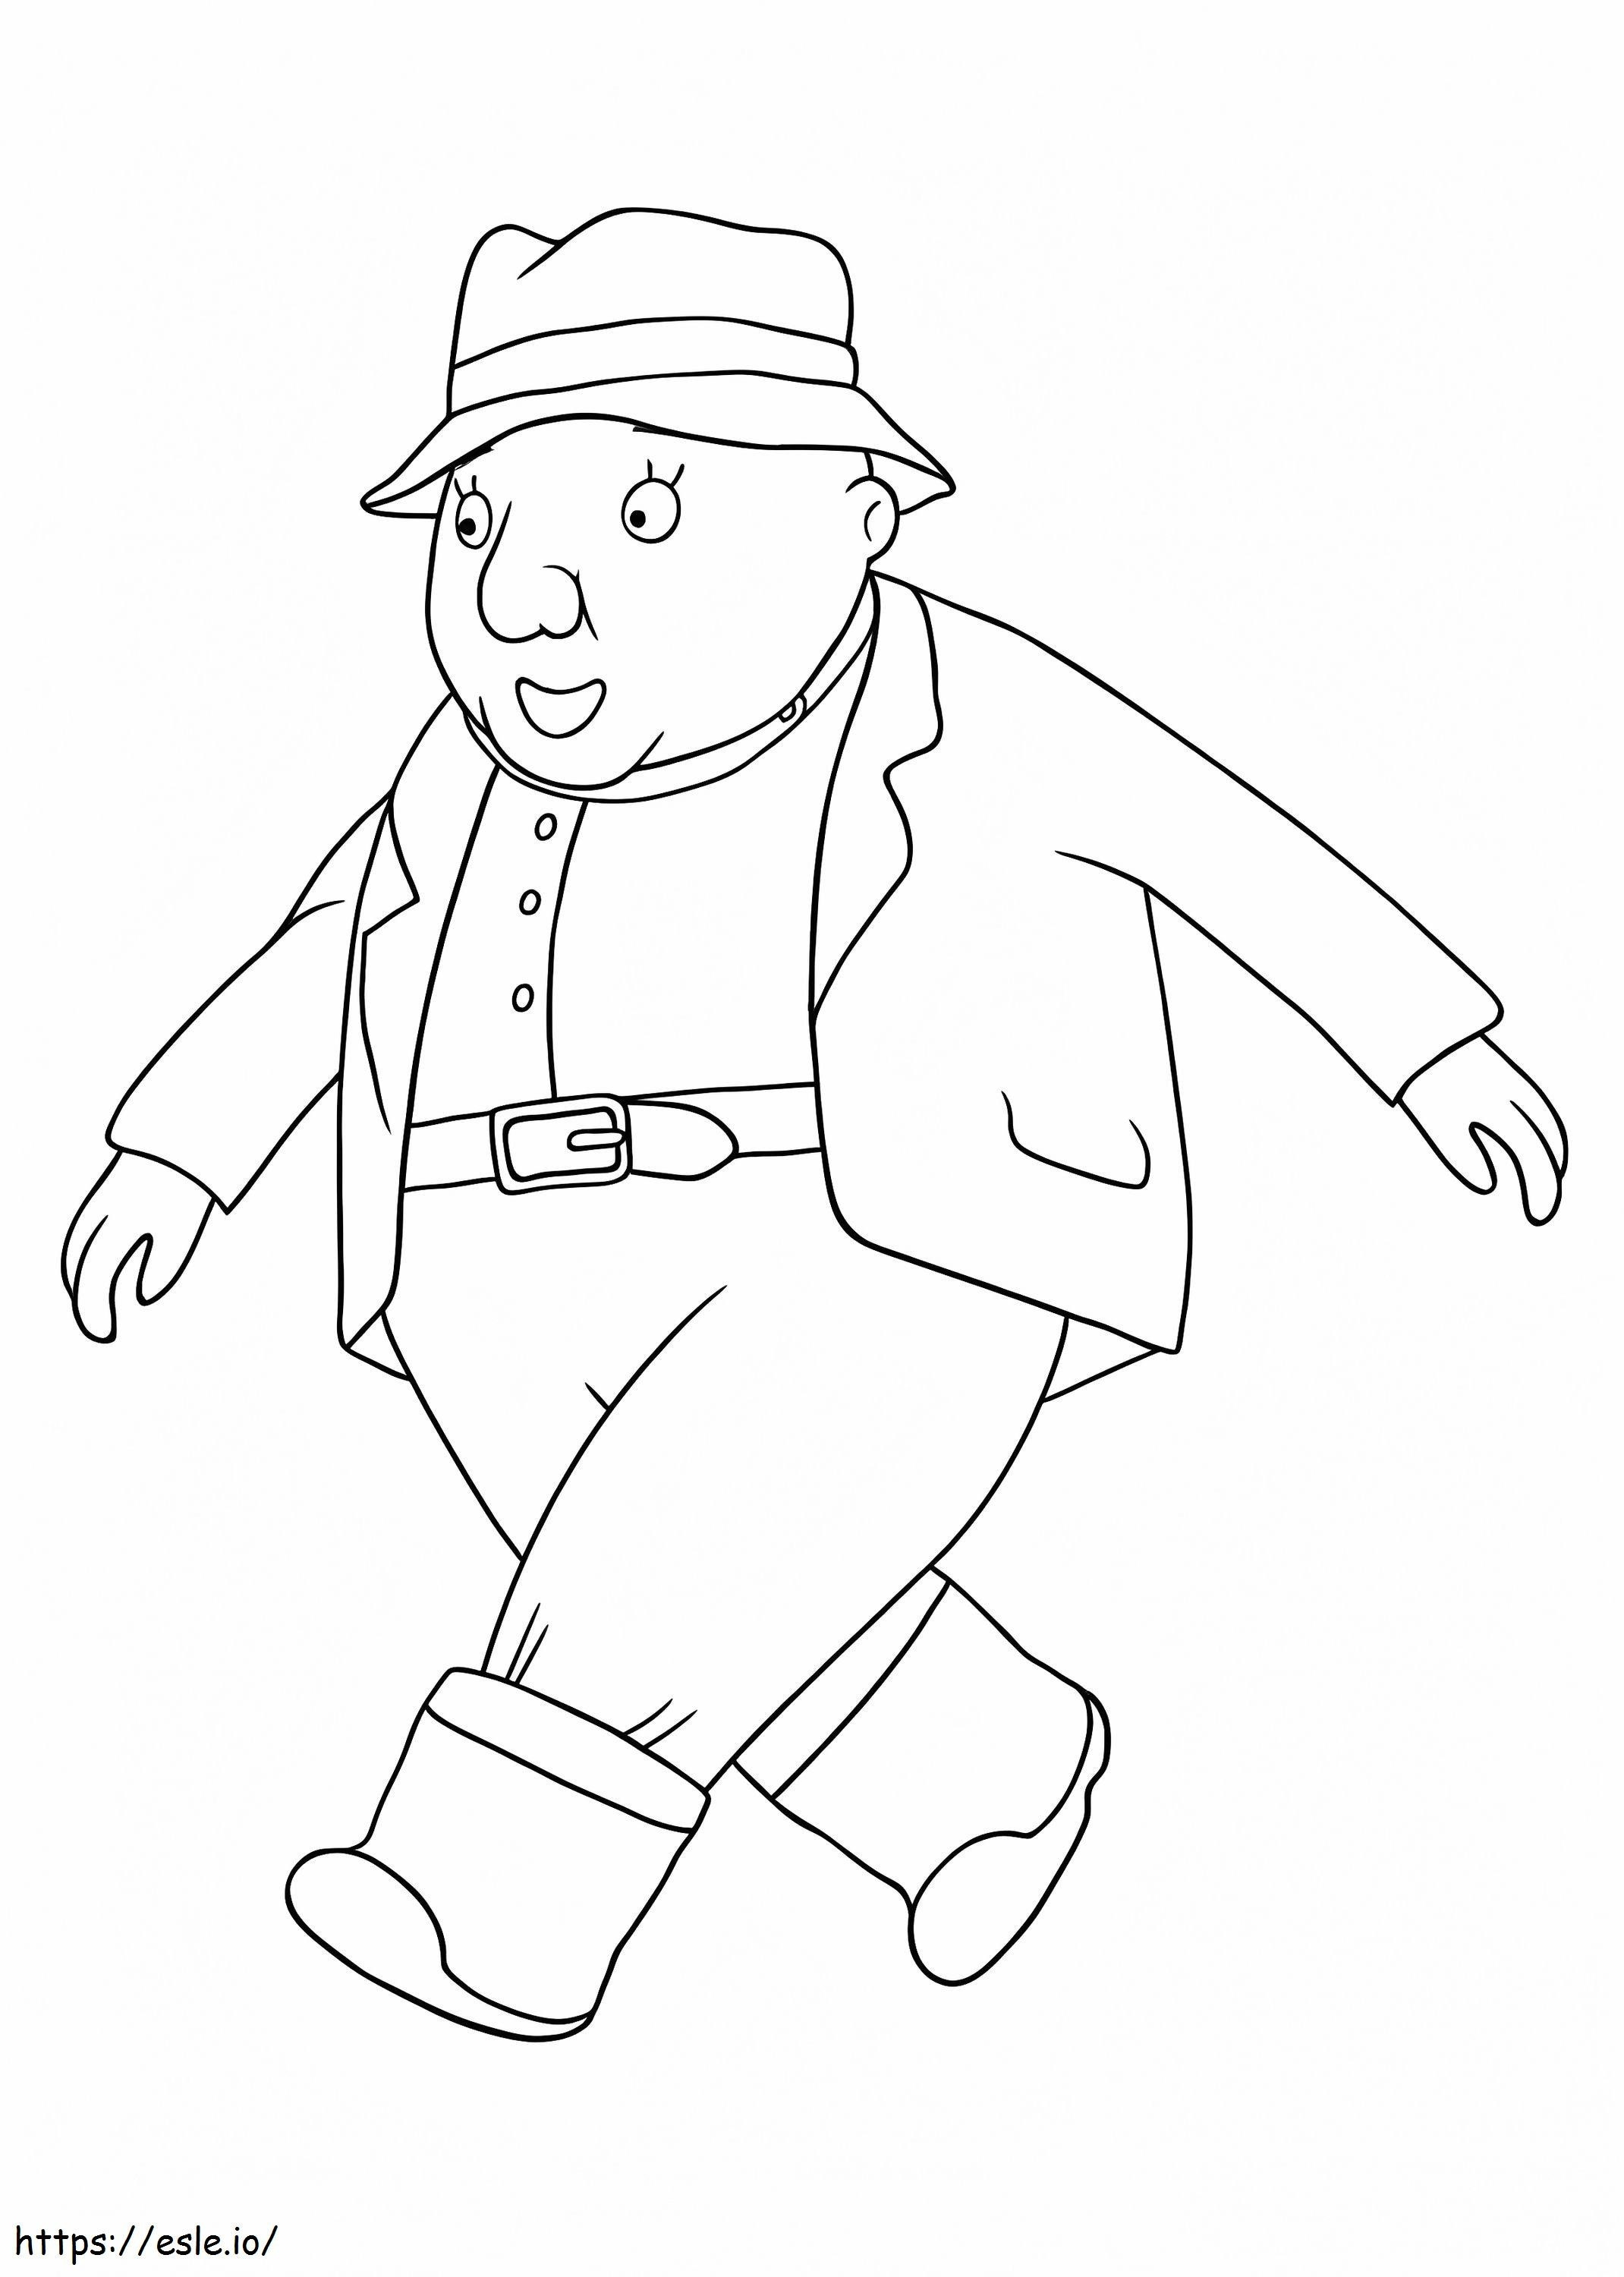 Gardener From Little Princess coloring page